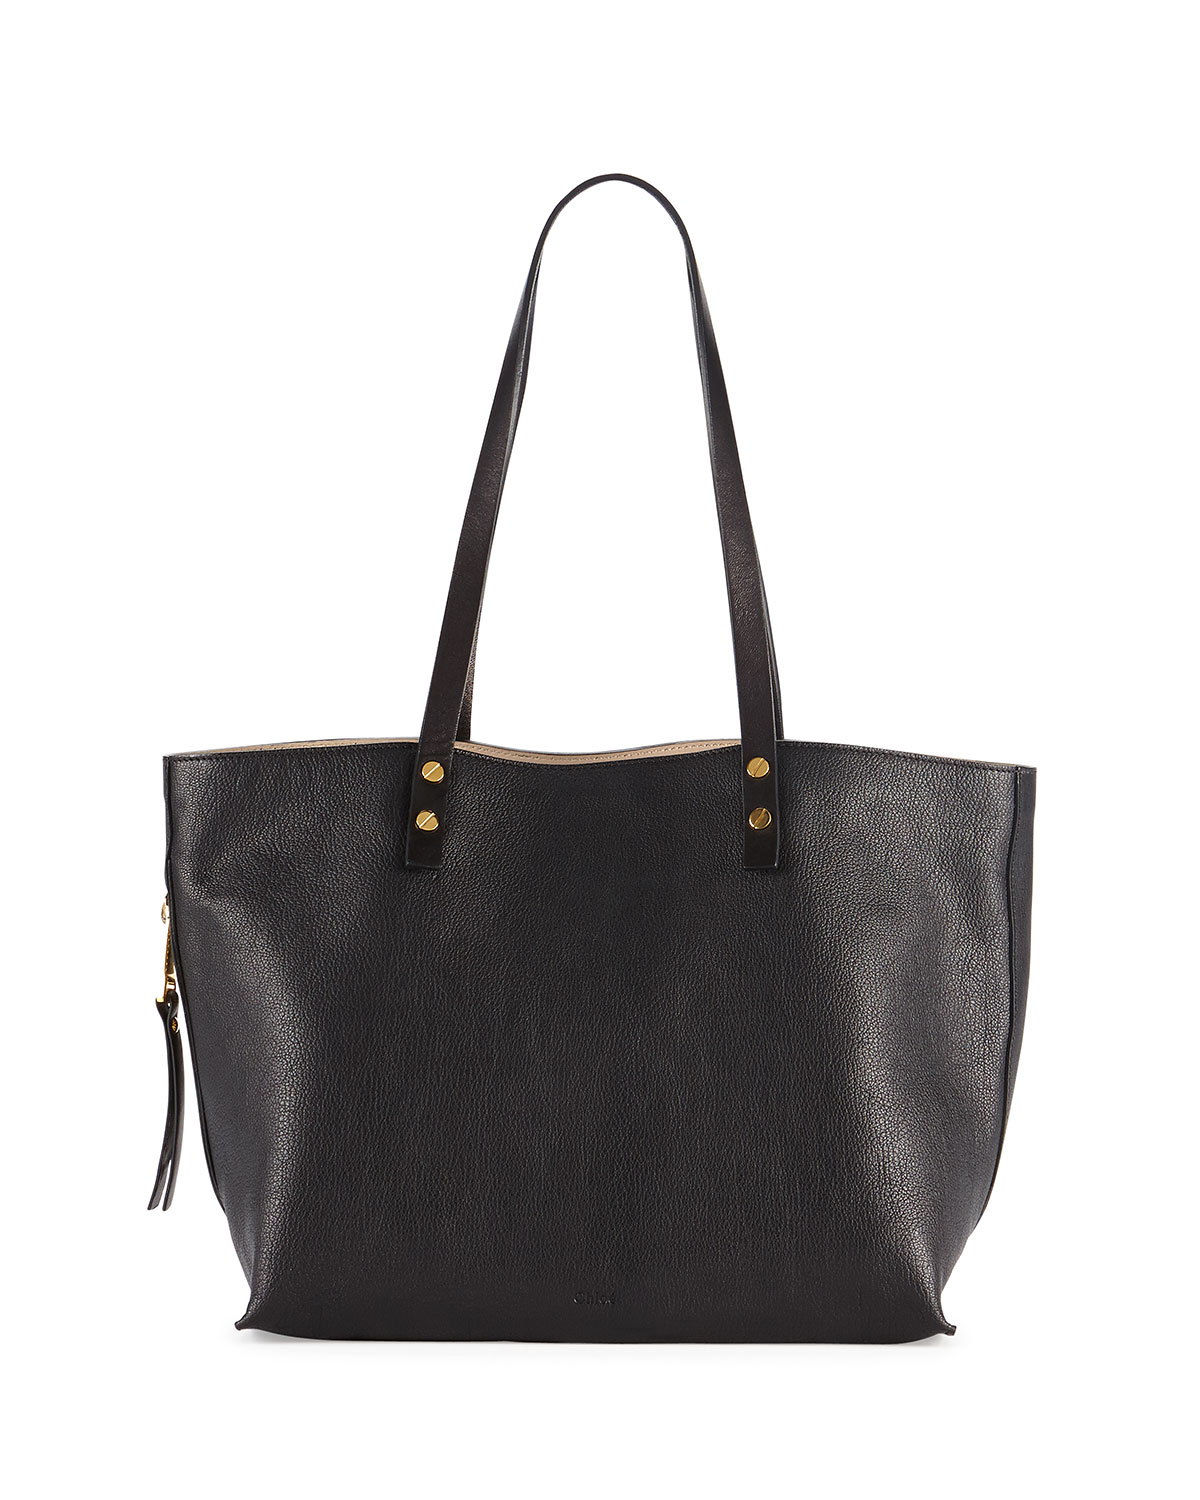 Chloé Dilan East-West Leather Tote Bag in Black | Lyst